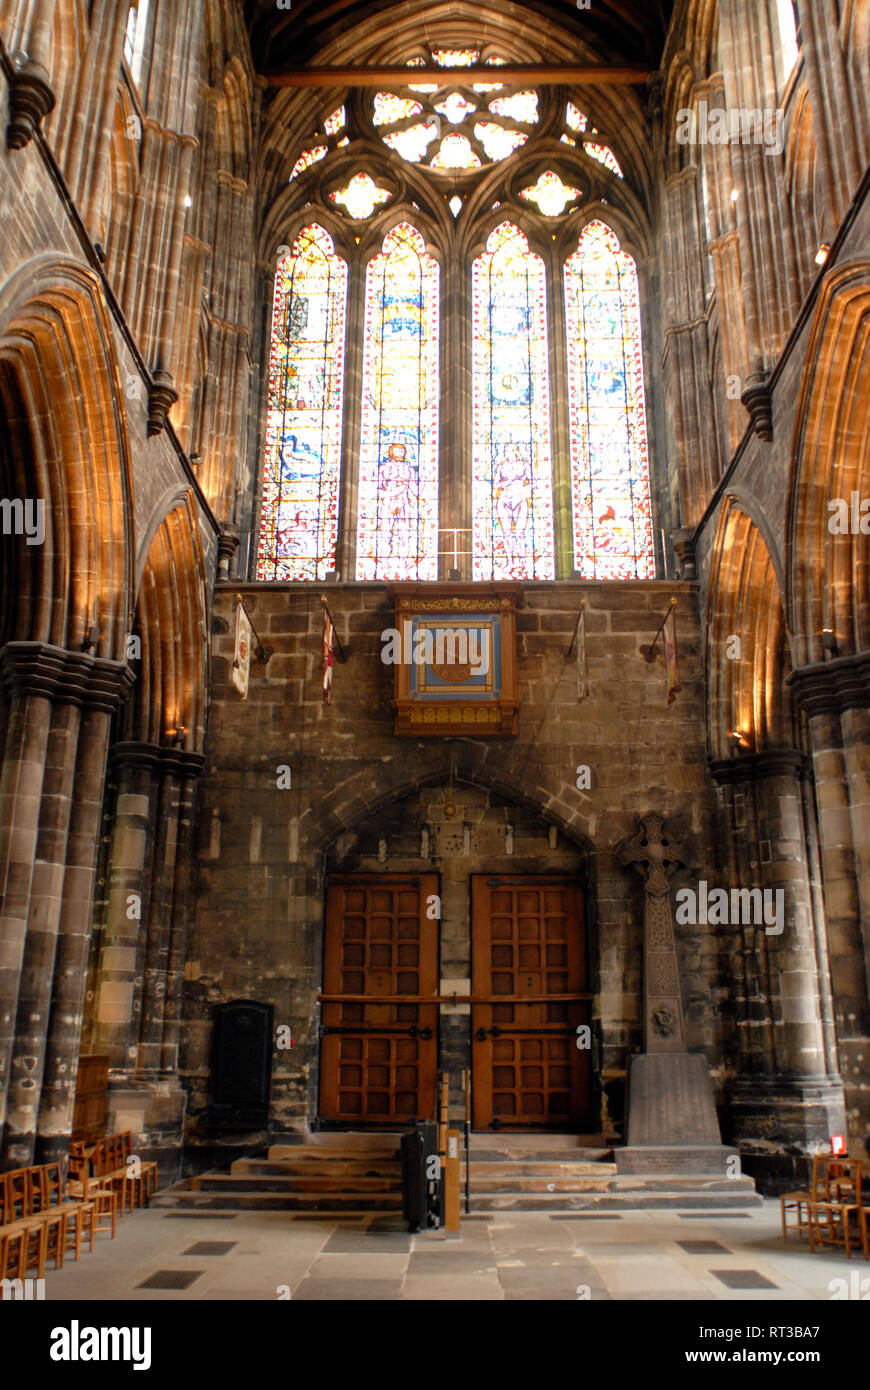 Religious and cultural tourism: Glasgow Cathedral, Scotland, United Kingdom Stock Photo